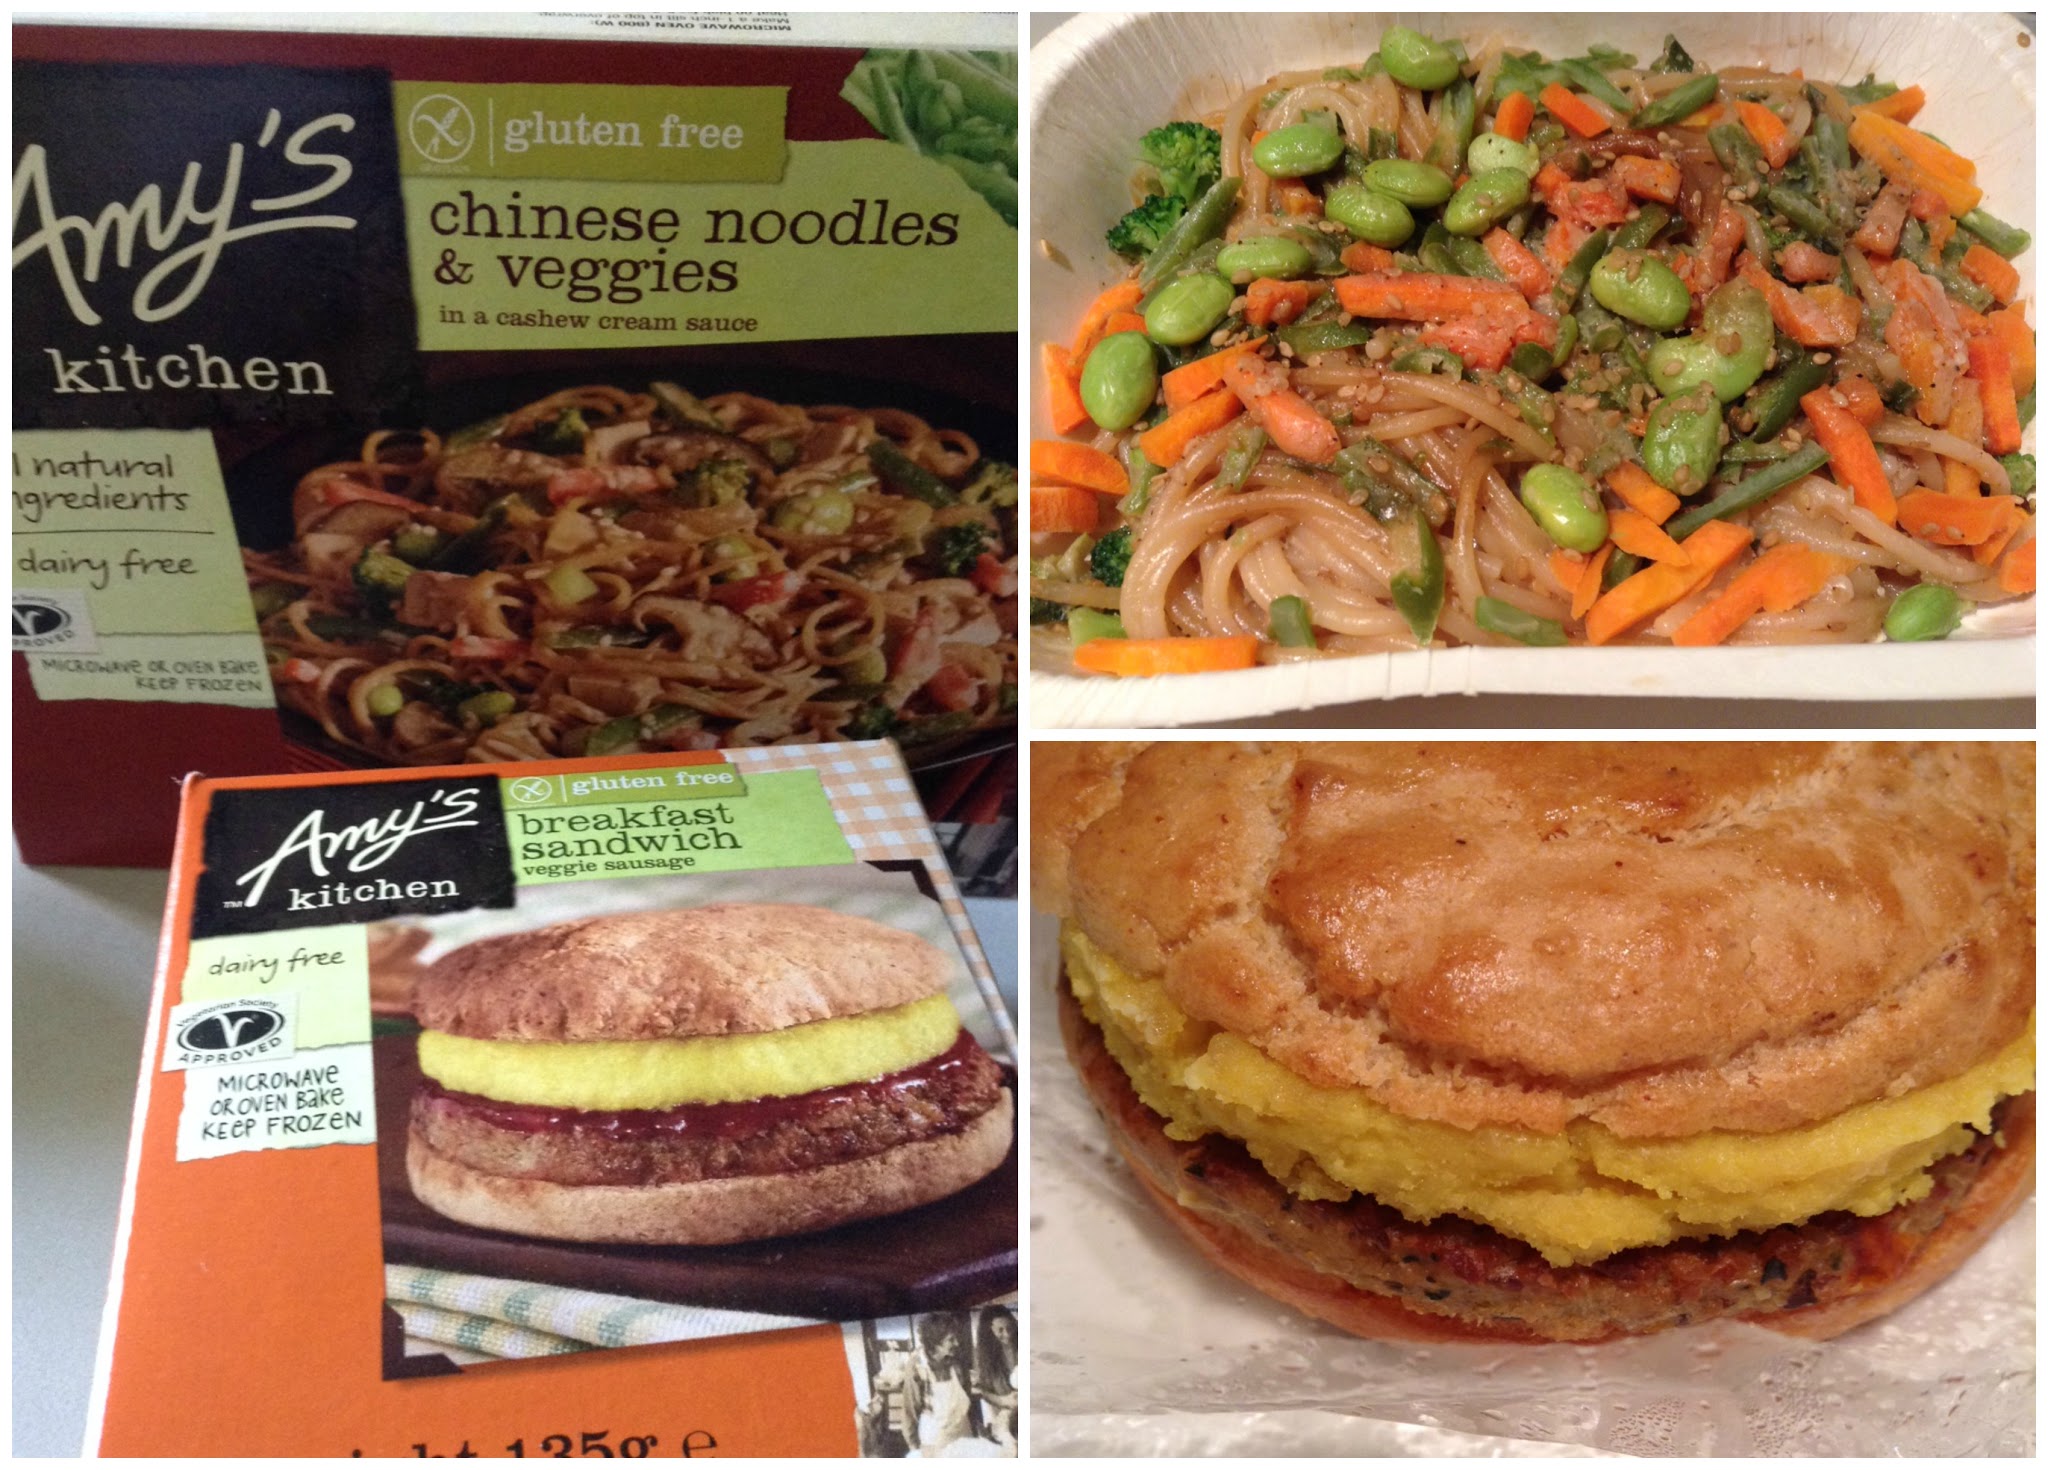 Amy's Kitchen Chinese Noodles & Veggies and Breakfast Sandwich